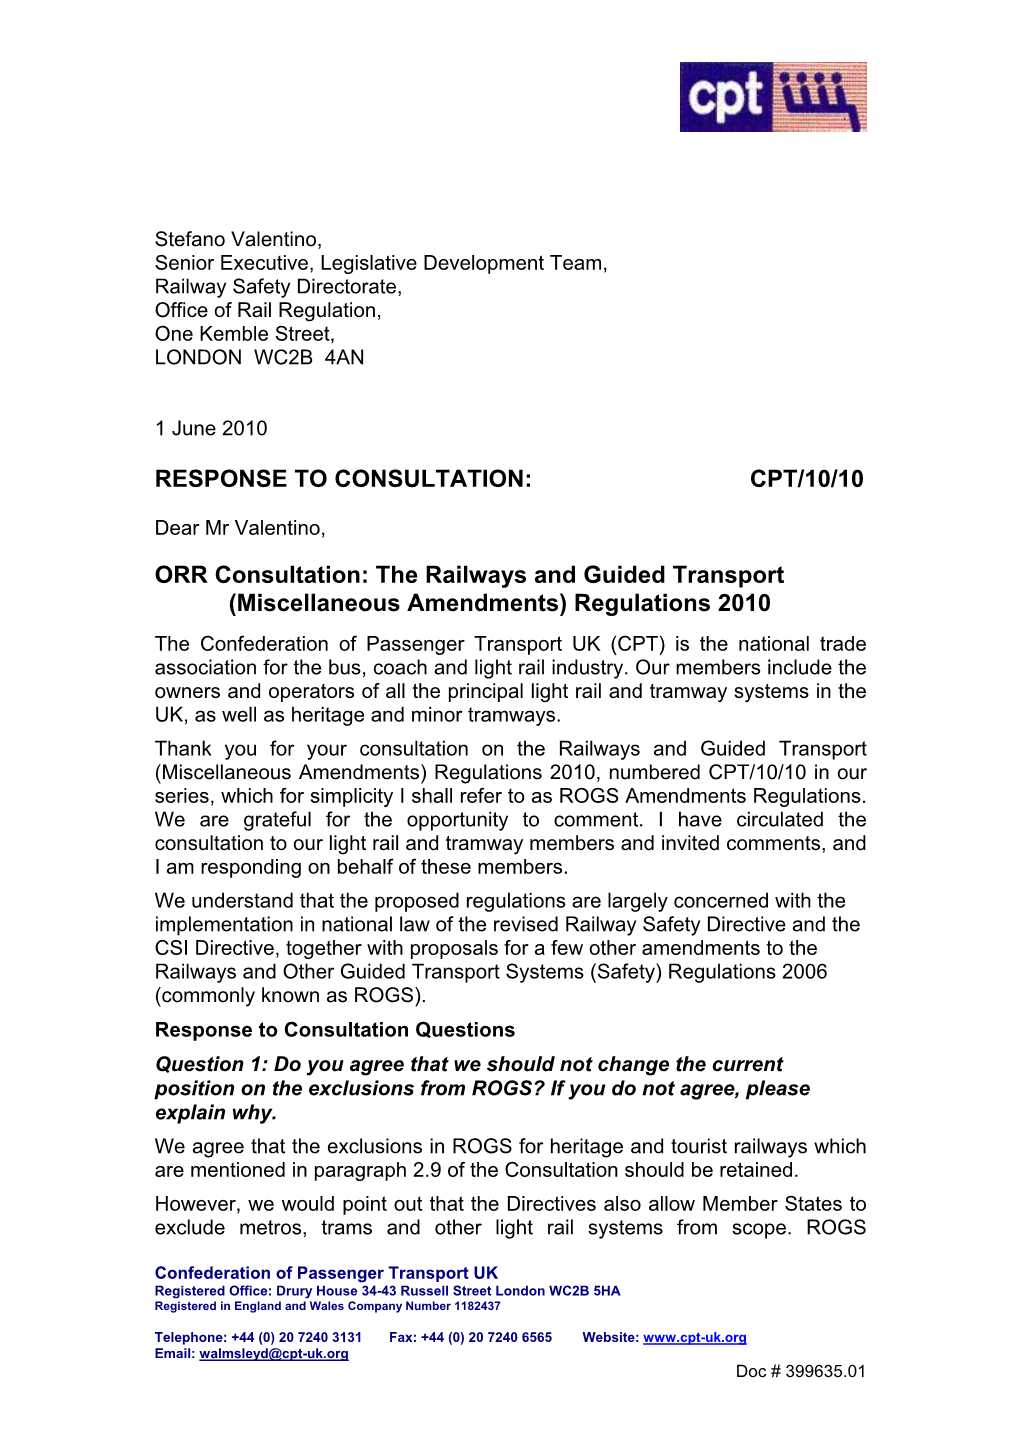 Railways and Guided Transport Consultation